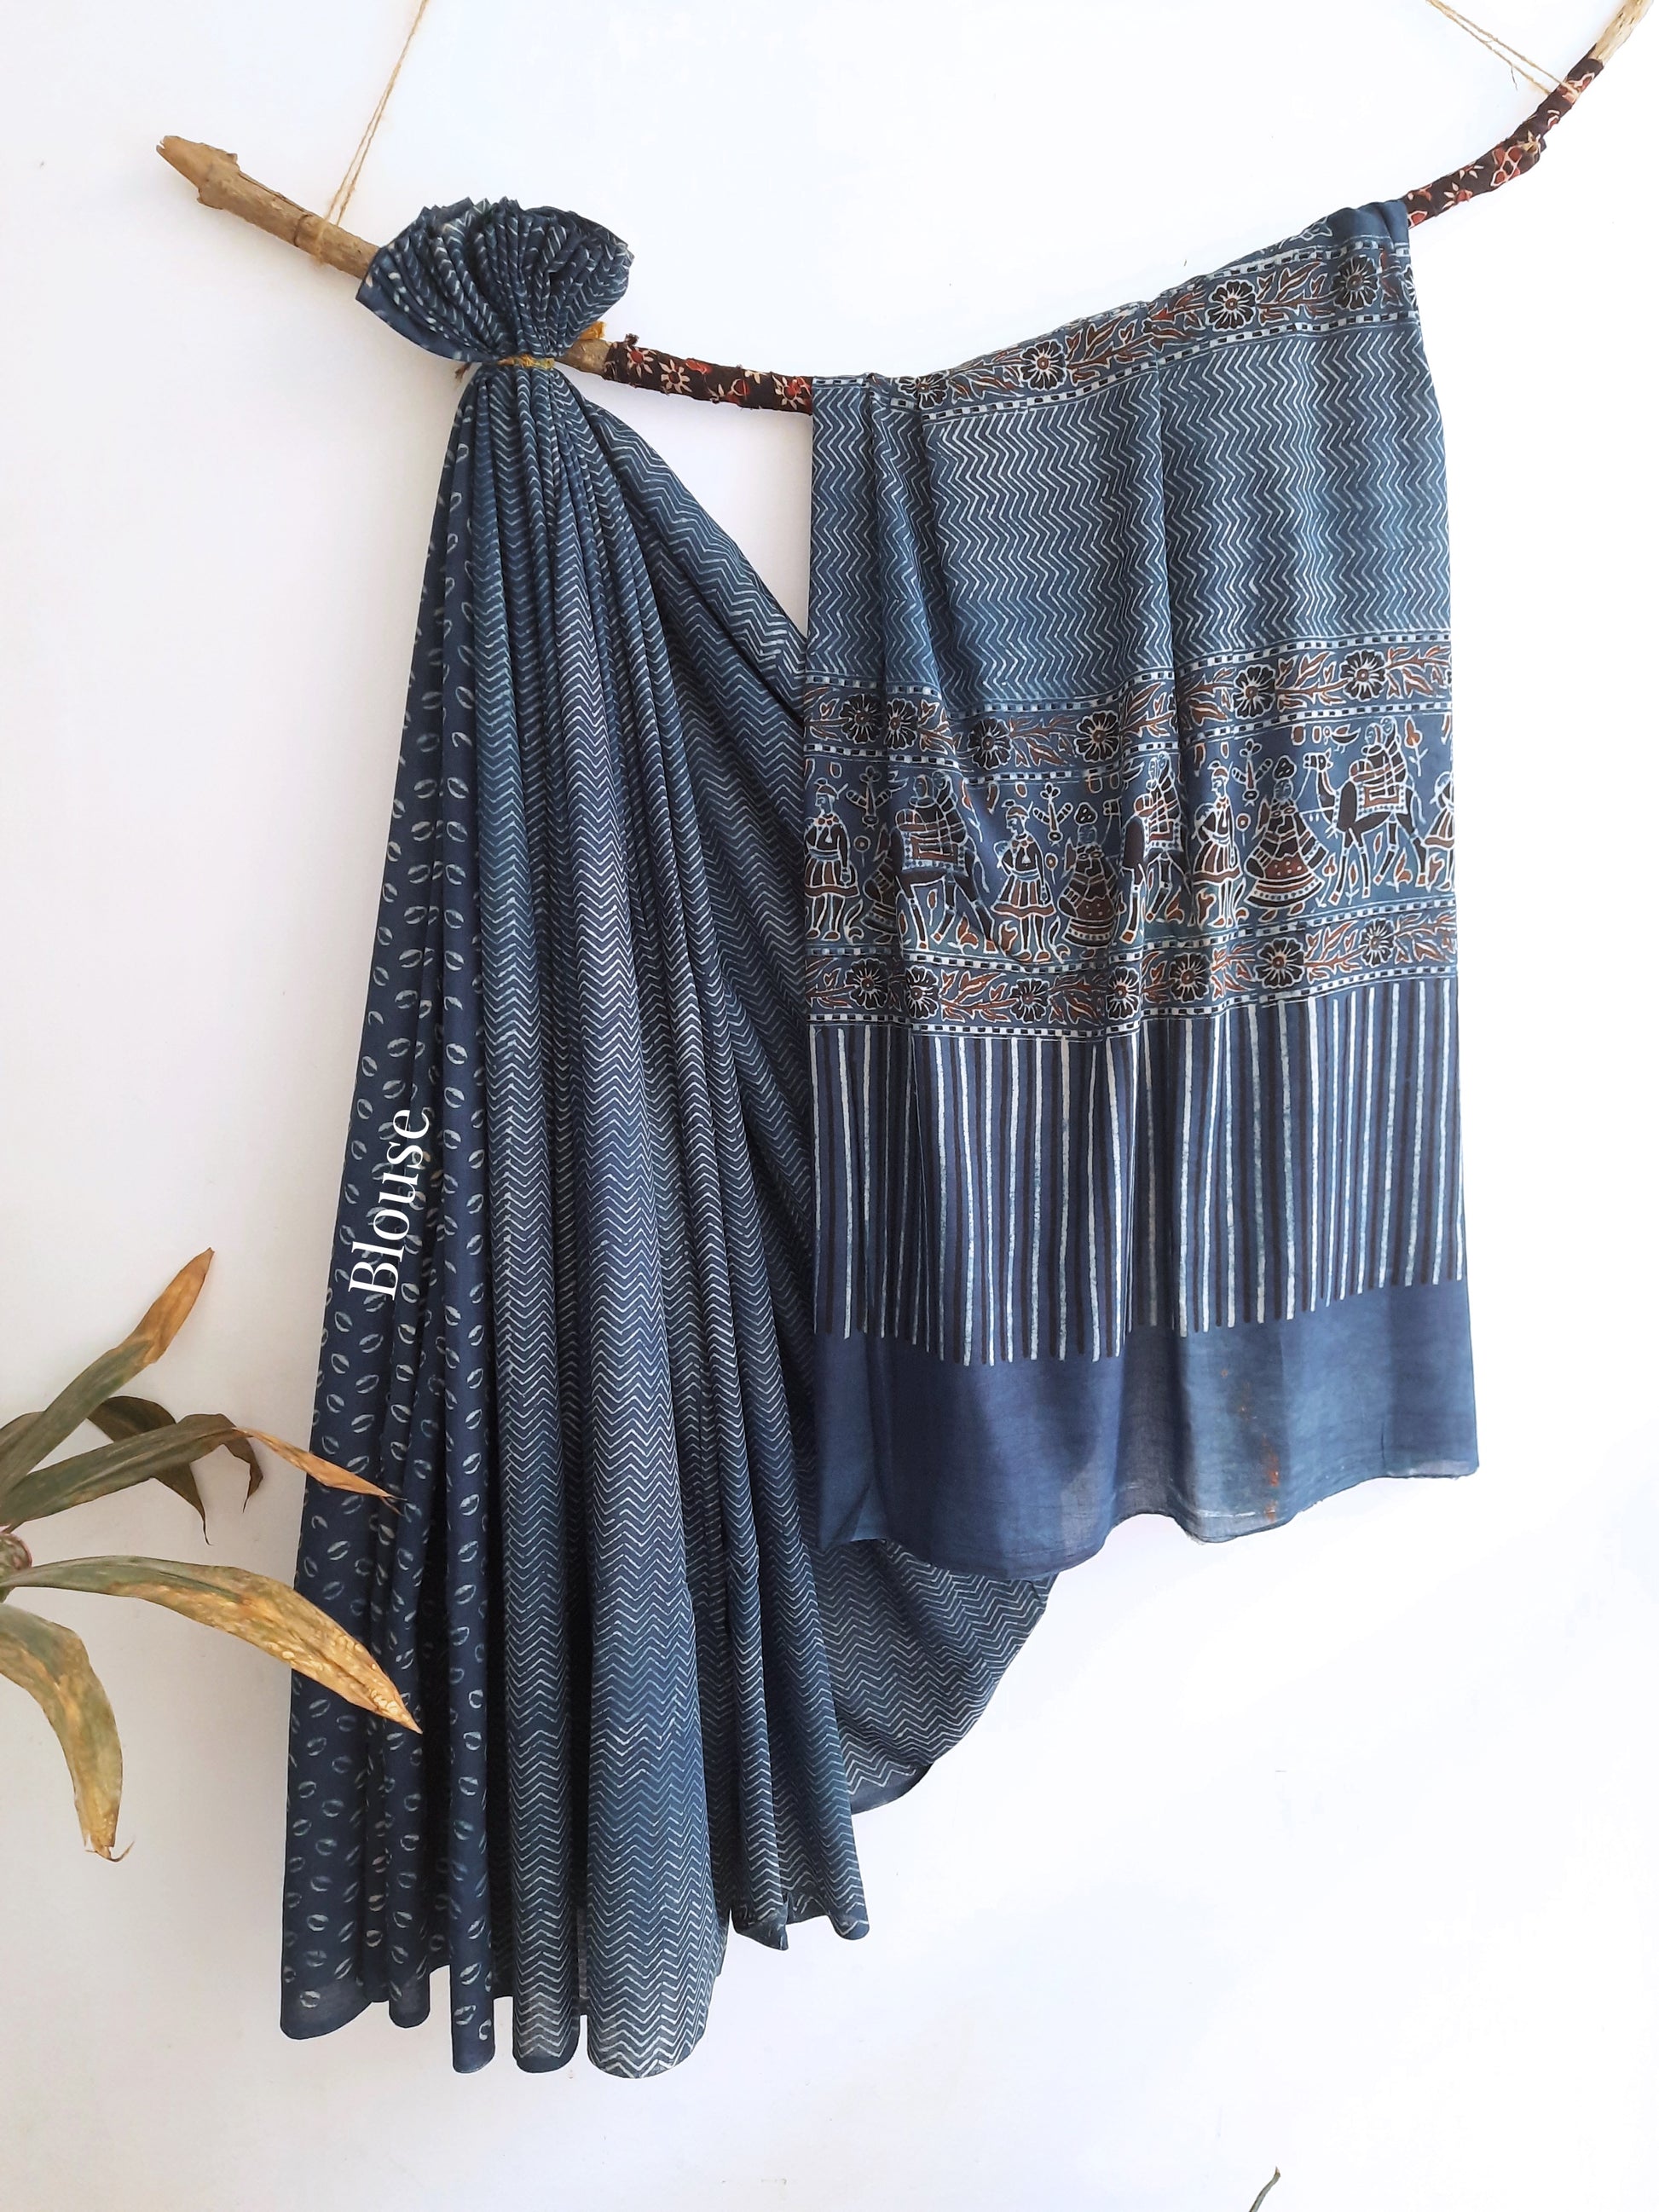 Indigo-dyed Ajrakh hand block printed saree crafted in pure cotton by Turquoisethestore, a blend of comfort and style.